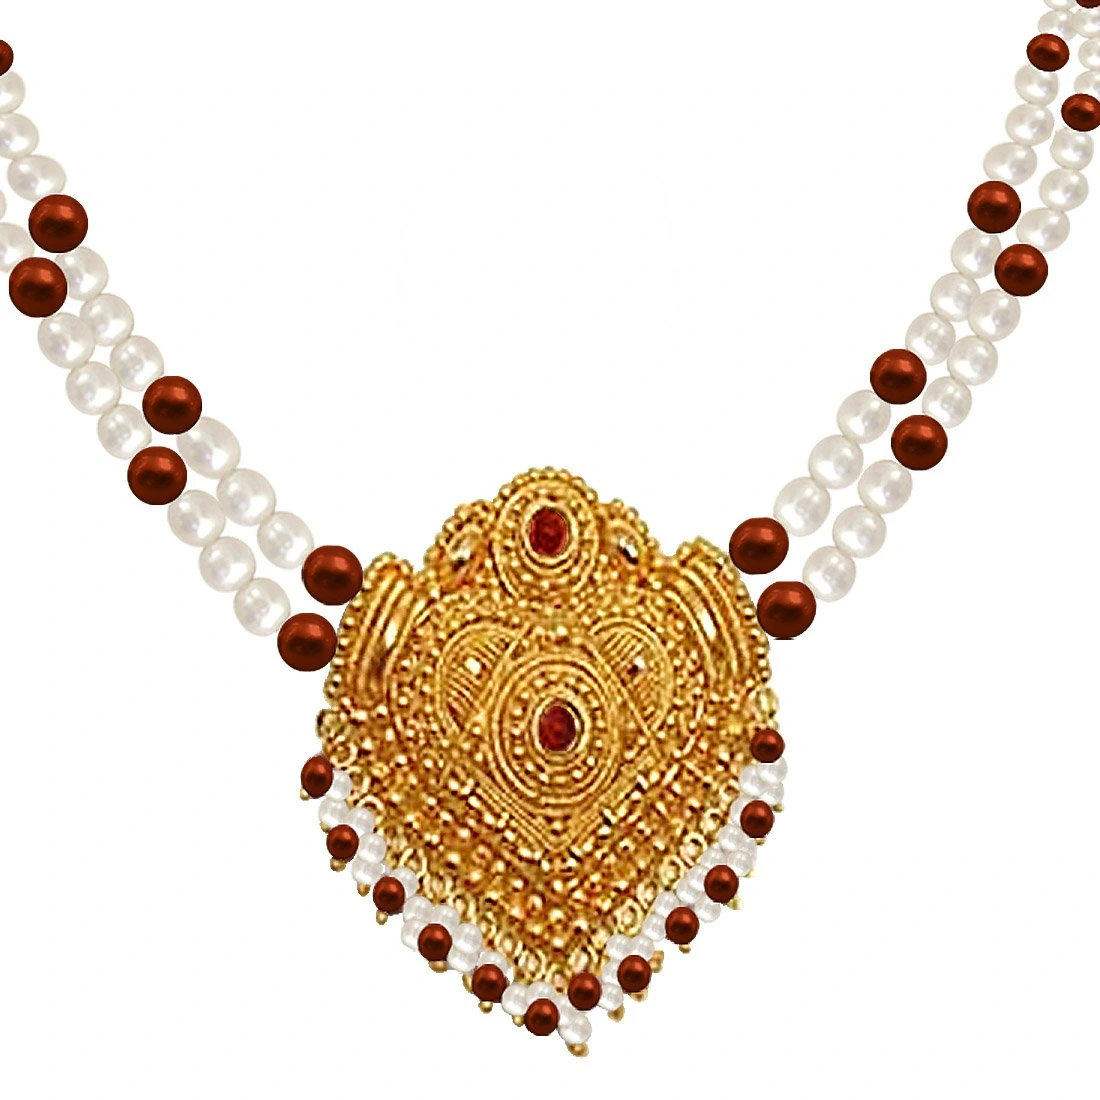 Ornate Beauty - Gold Plated Temple Design Pendant & 2 Line Freshwater Pearl & Tiger Eye Beads Necklace for Women (SNP2)